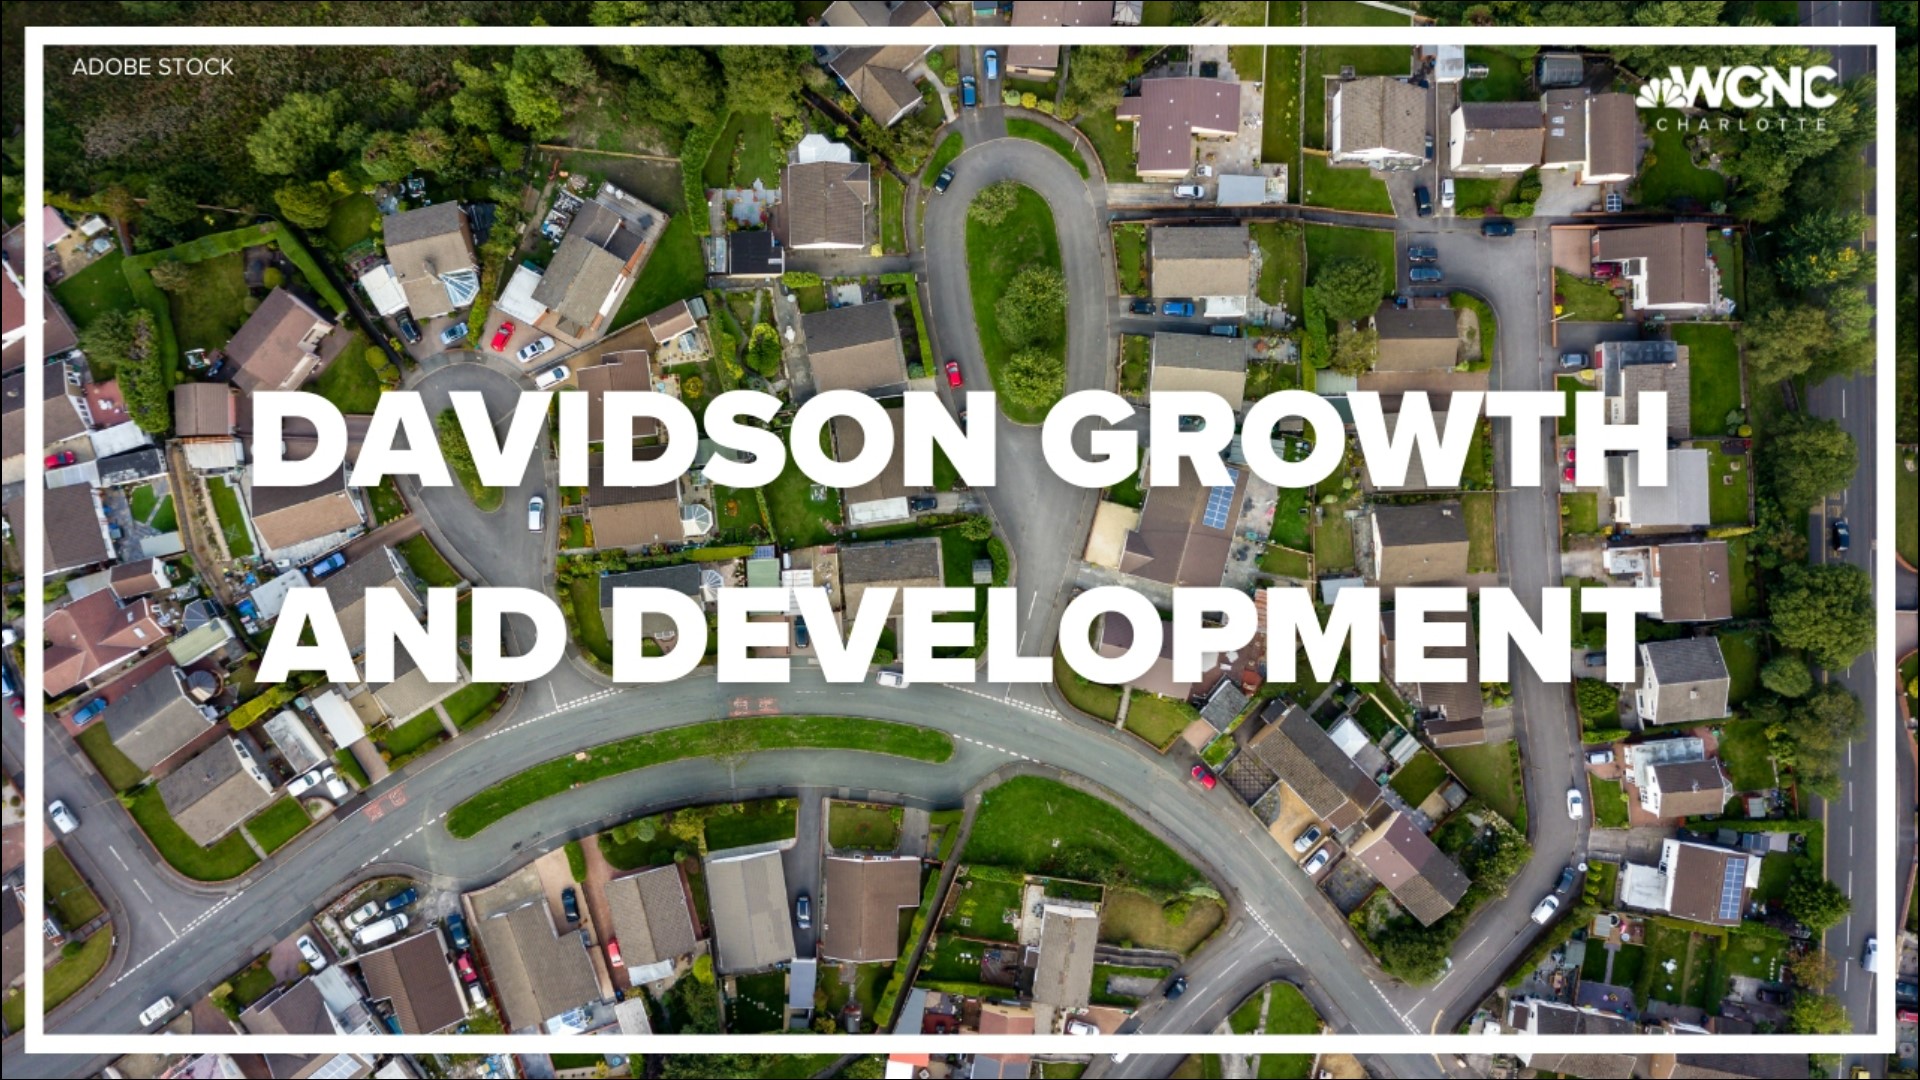 Despite the growth, Davidson still has its small-town flare.